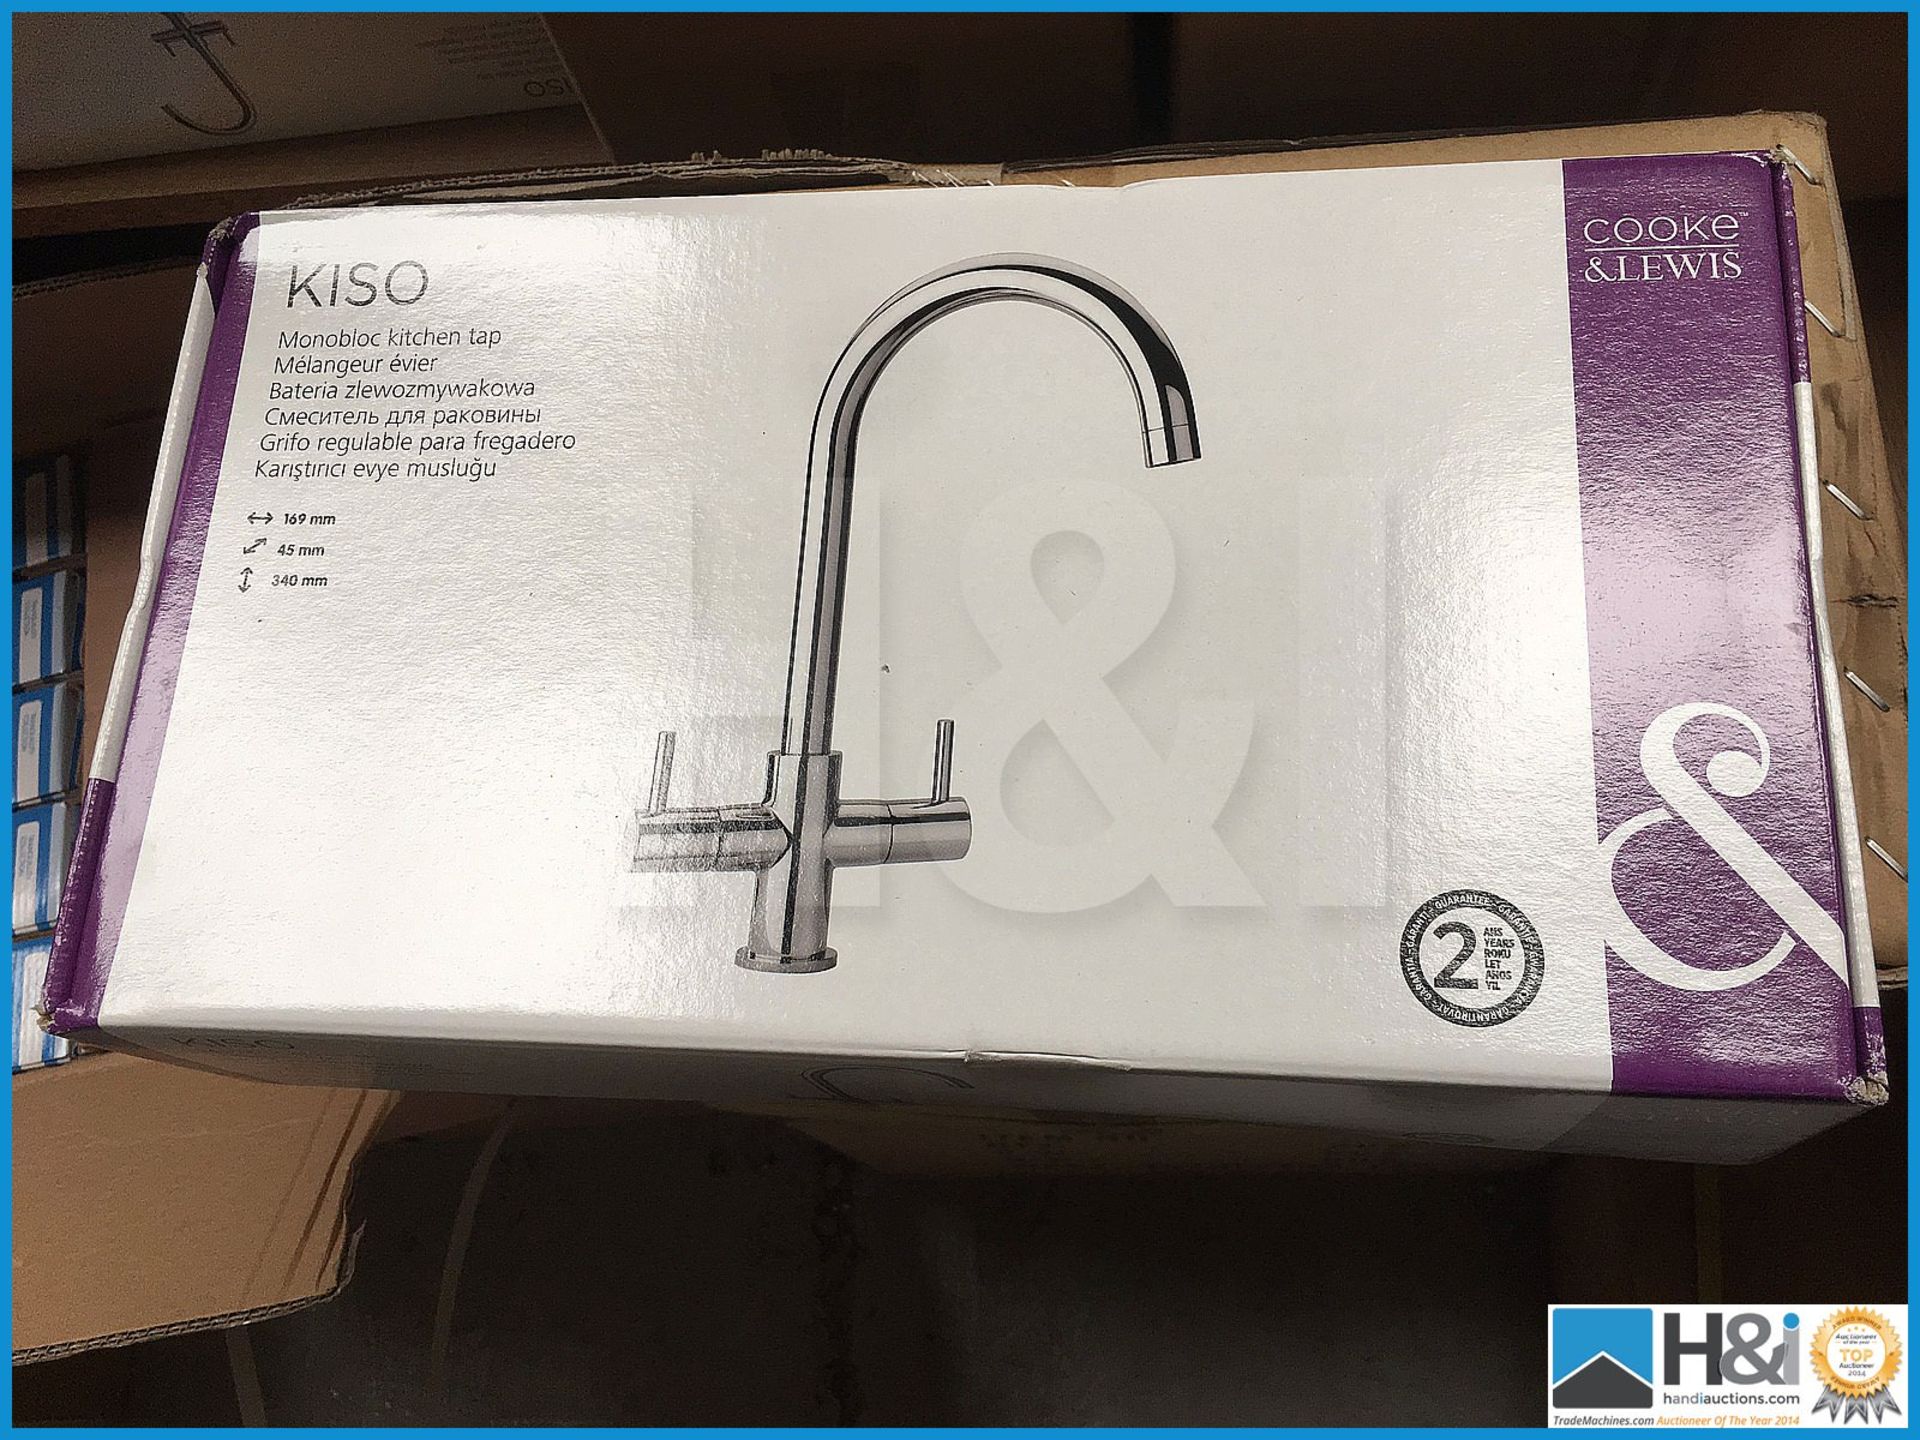 Cooke and Lewis Kiso polished chrome monobloc kitchen tap. Unused and boxed. Suggested manufacturers